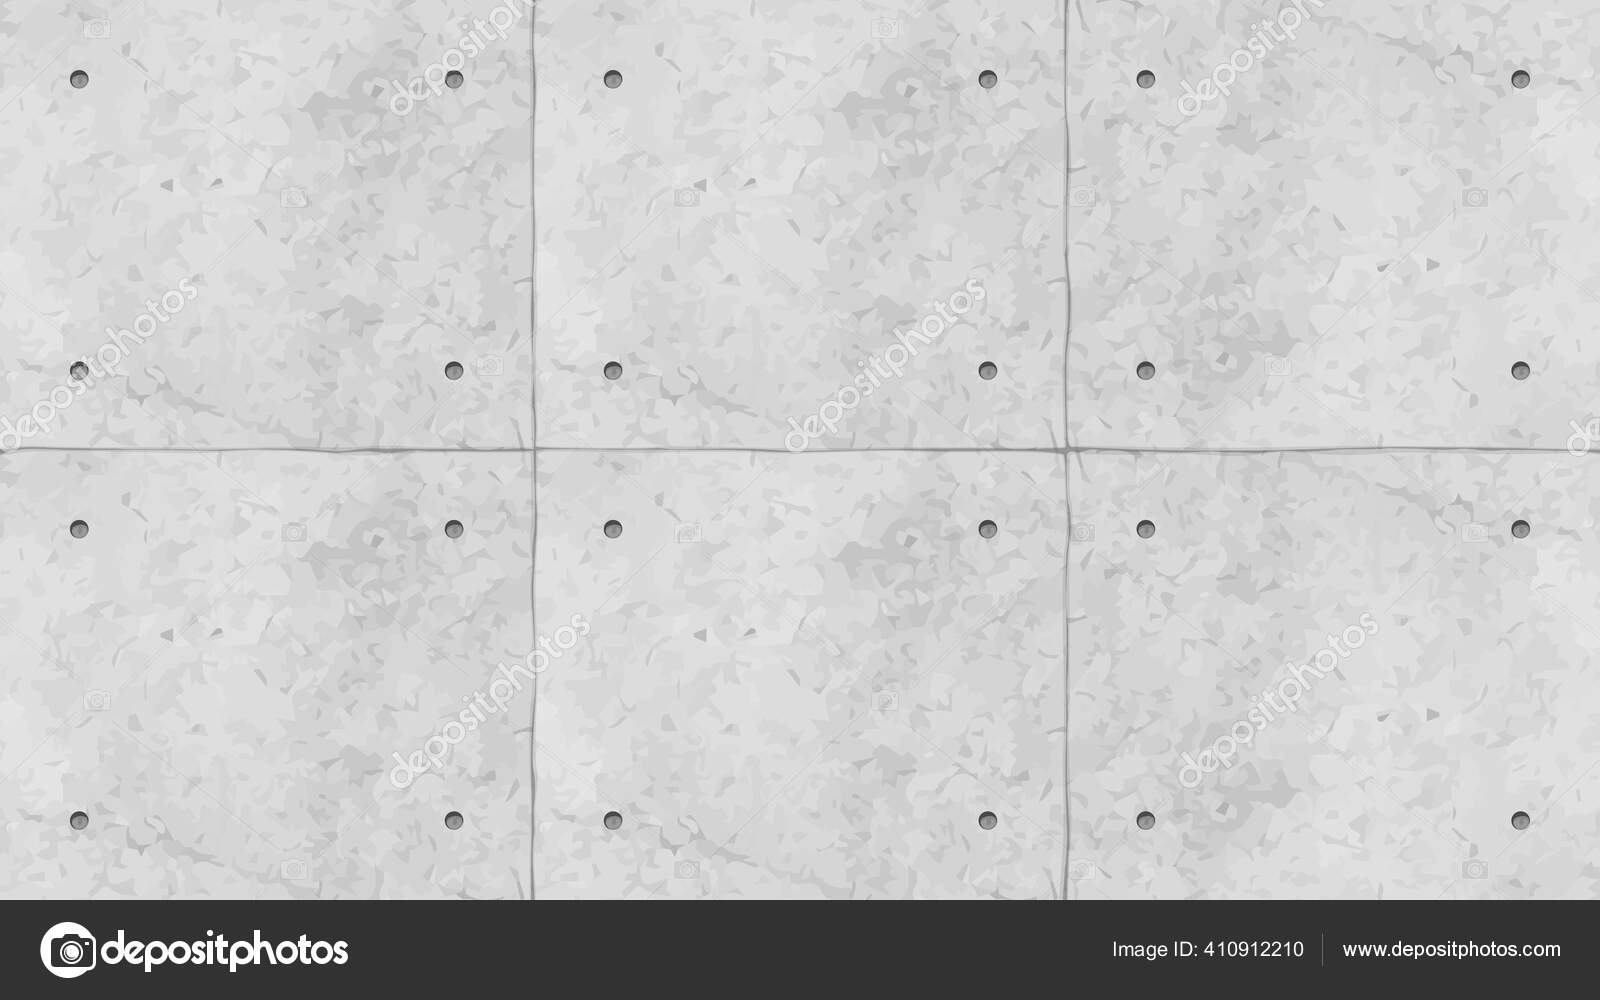 Grey Color Concrete Wall Panels With Holes Stock Vector C Ifh85